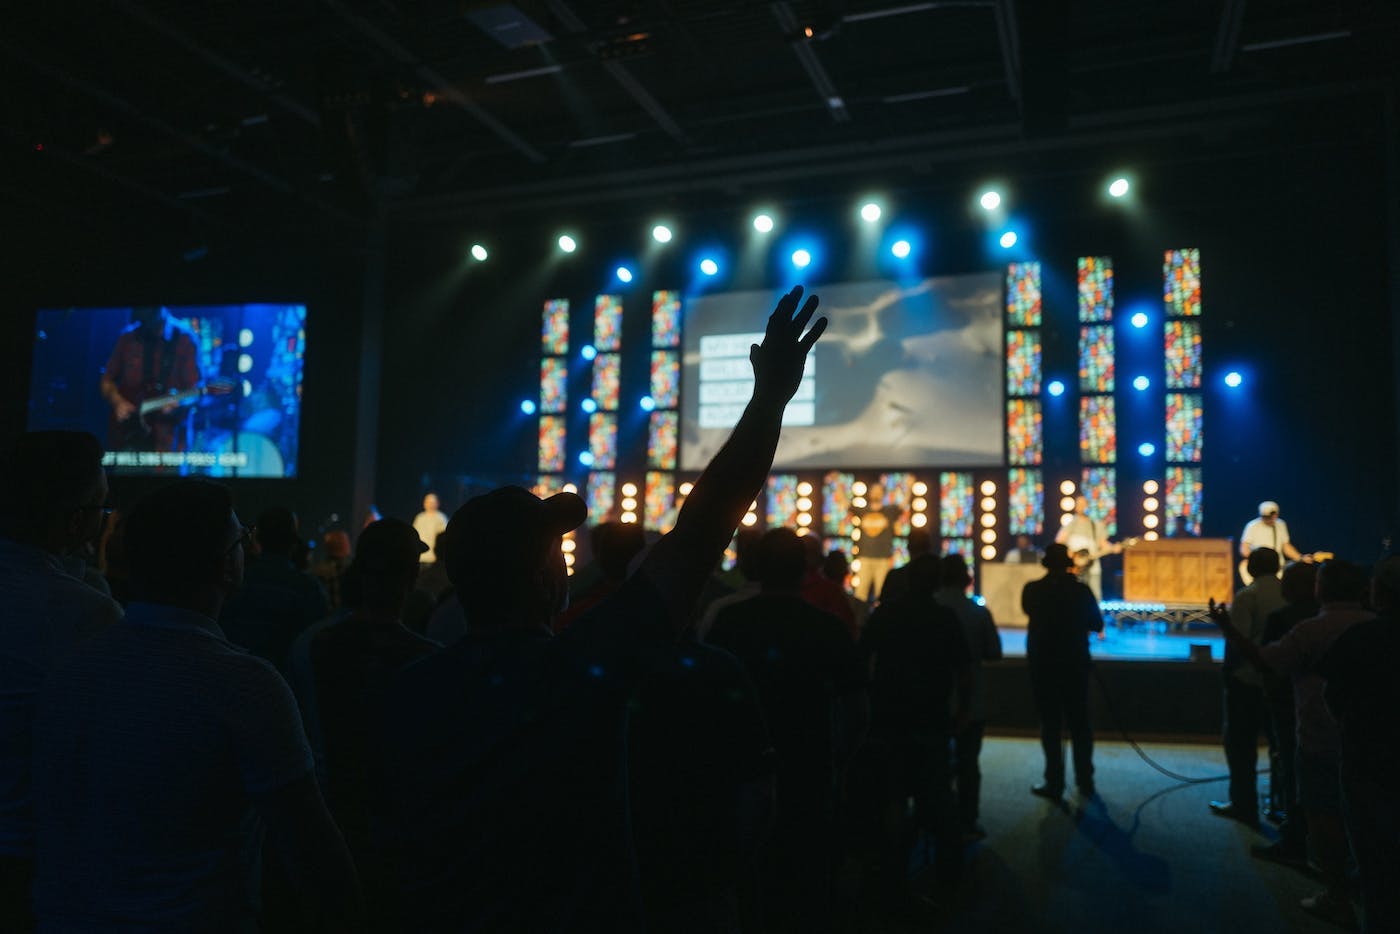 ScreenCloud Article - The ScreenCloud Guide to Church LED Video Walls